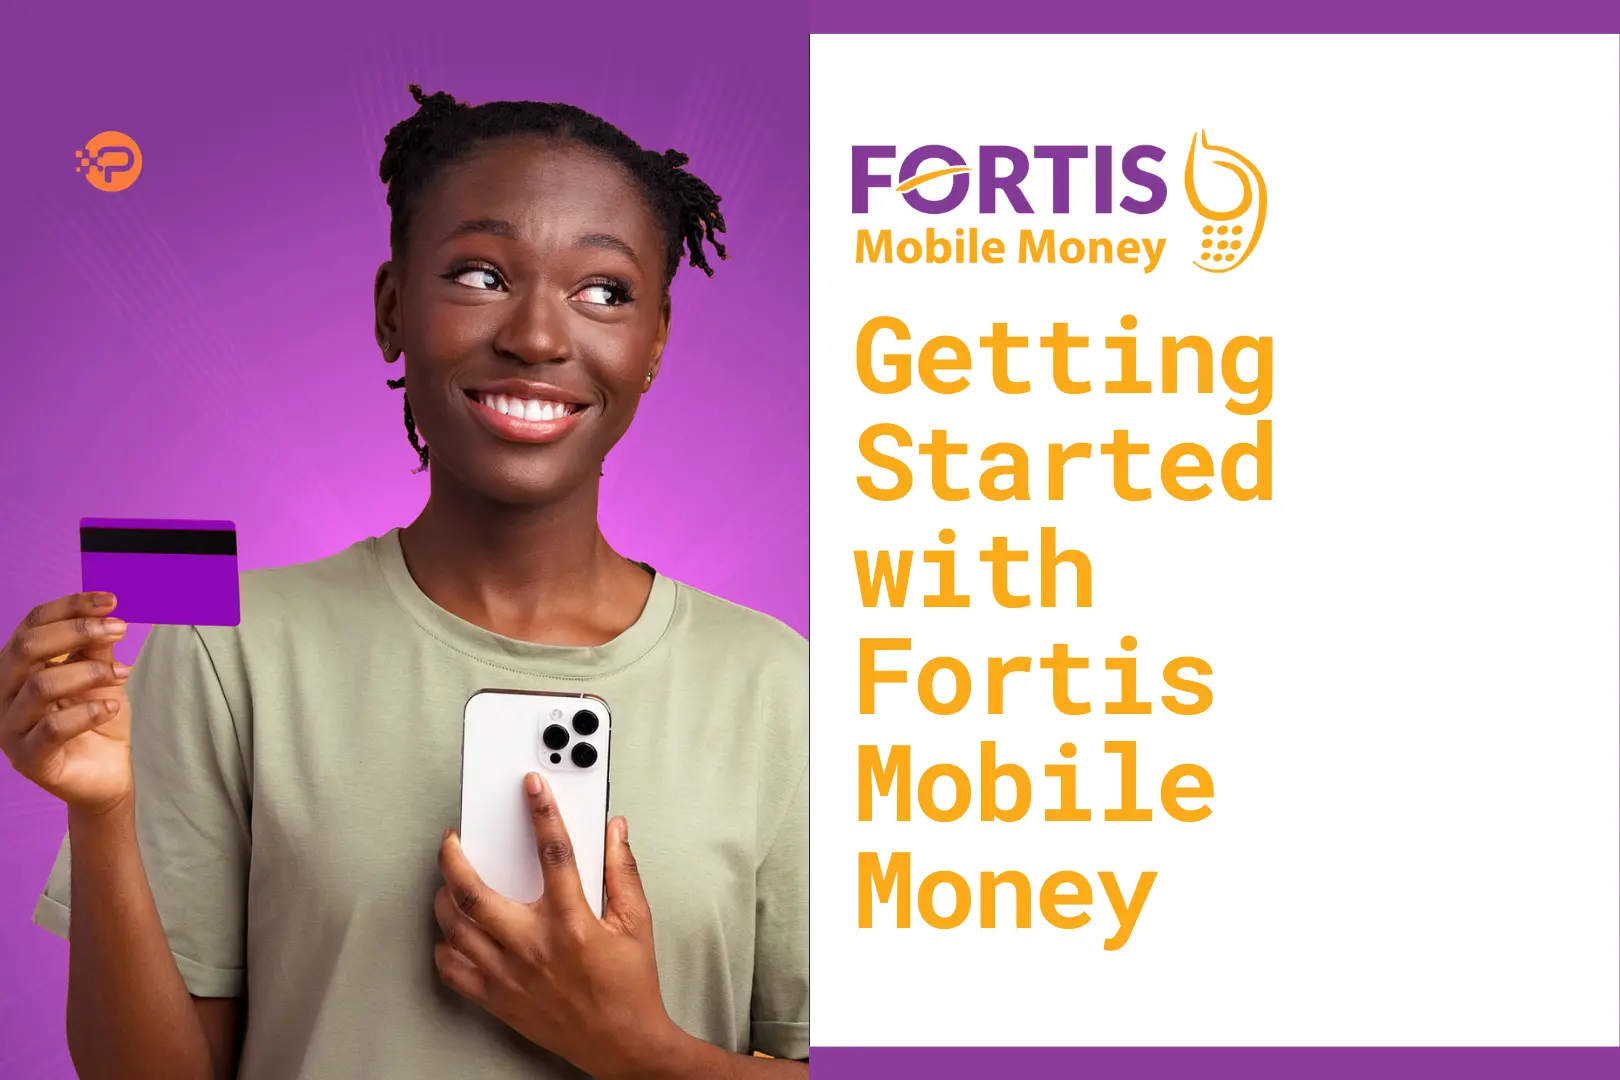 Fortis Mobile Money – All You Need to Know Before Getting Started